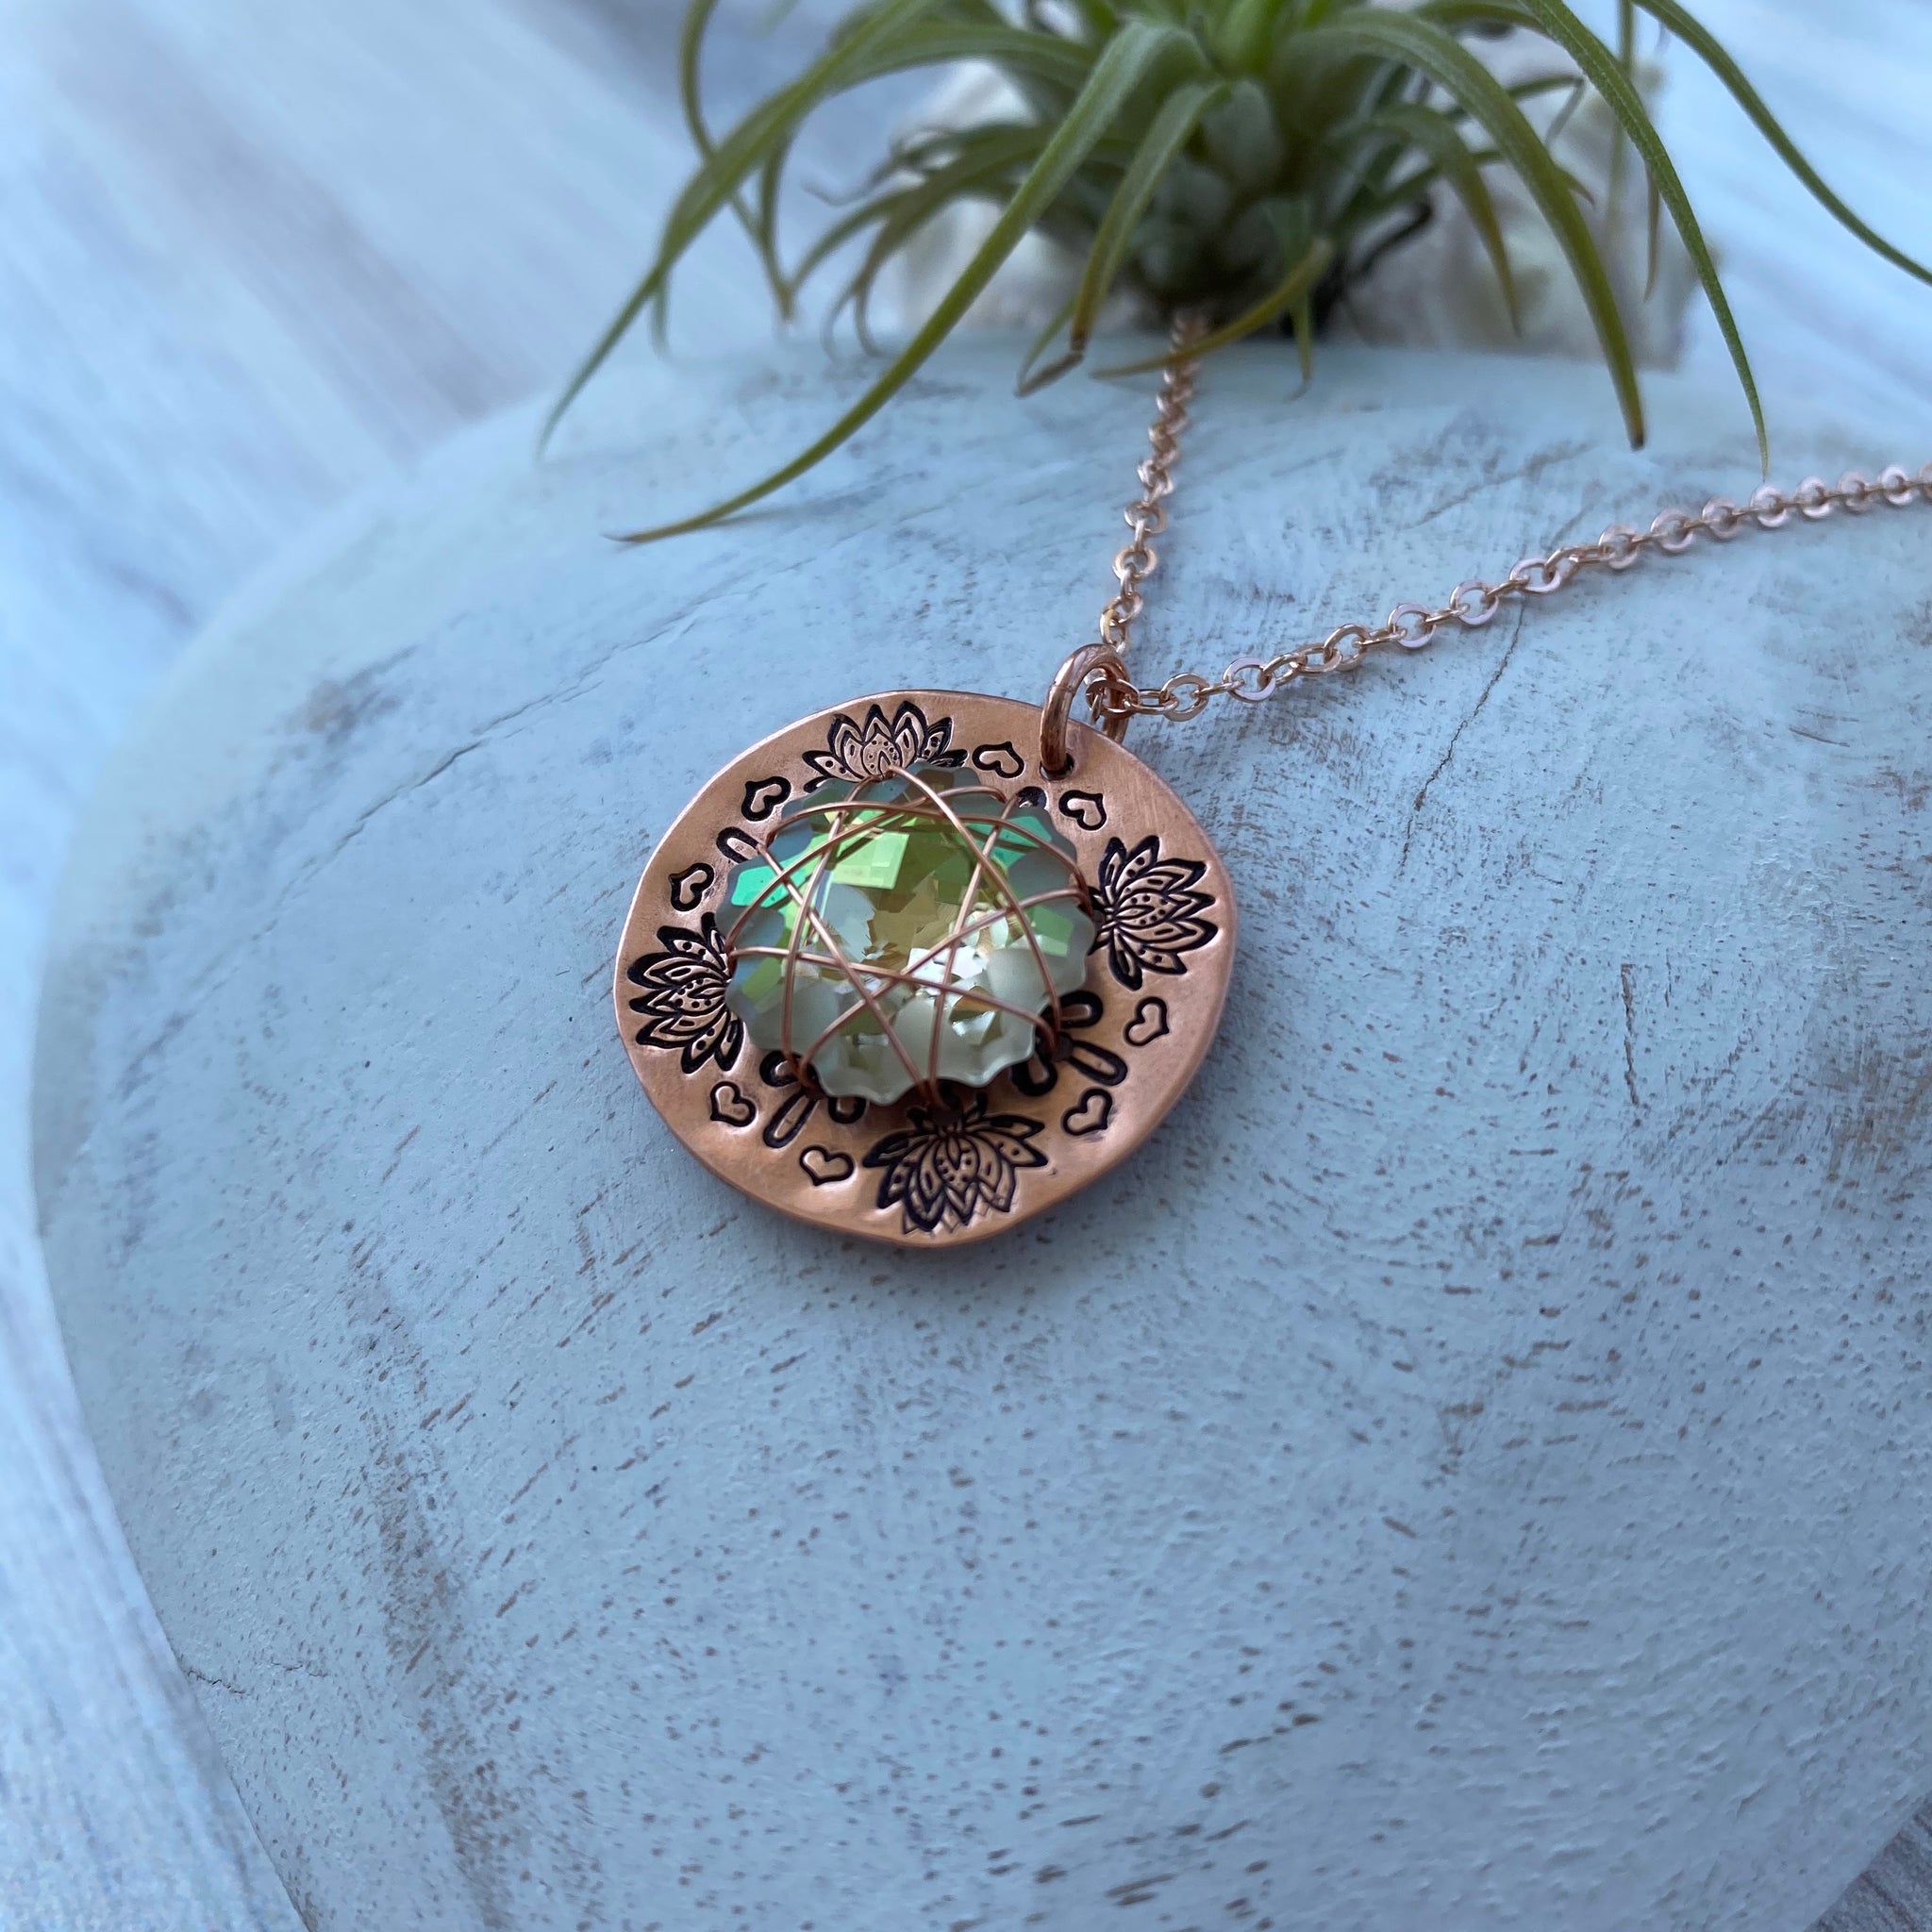 Small Crystal Mandala Necklace — Copper